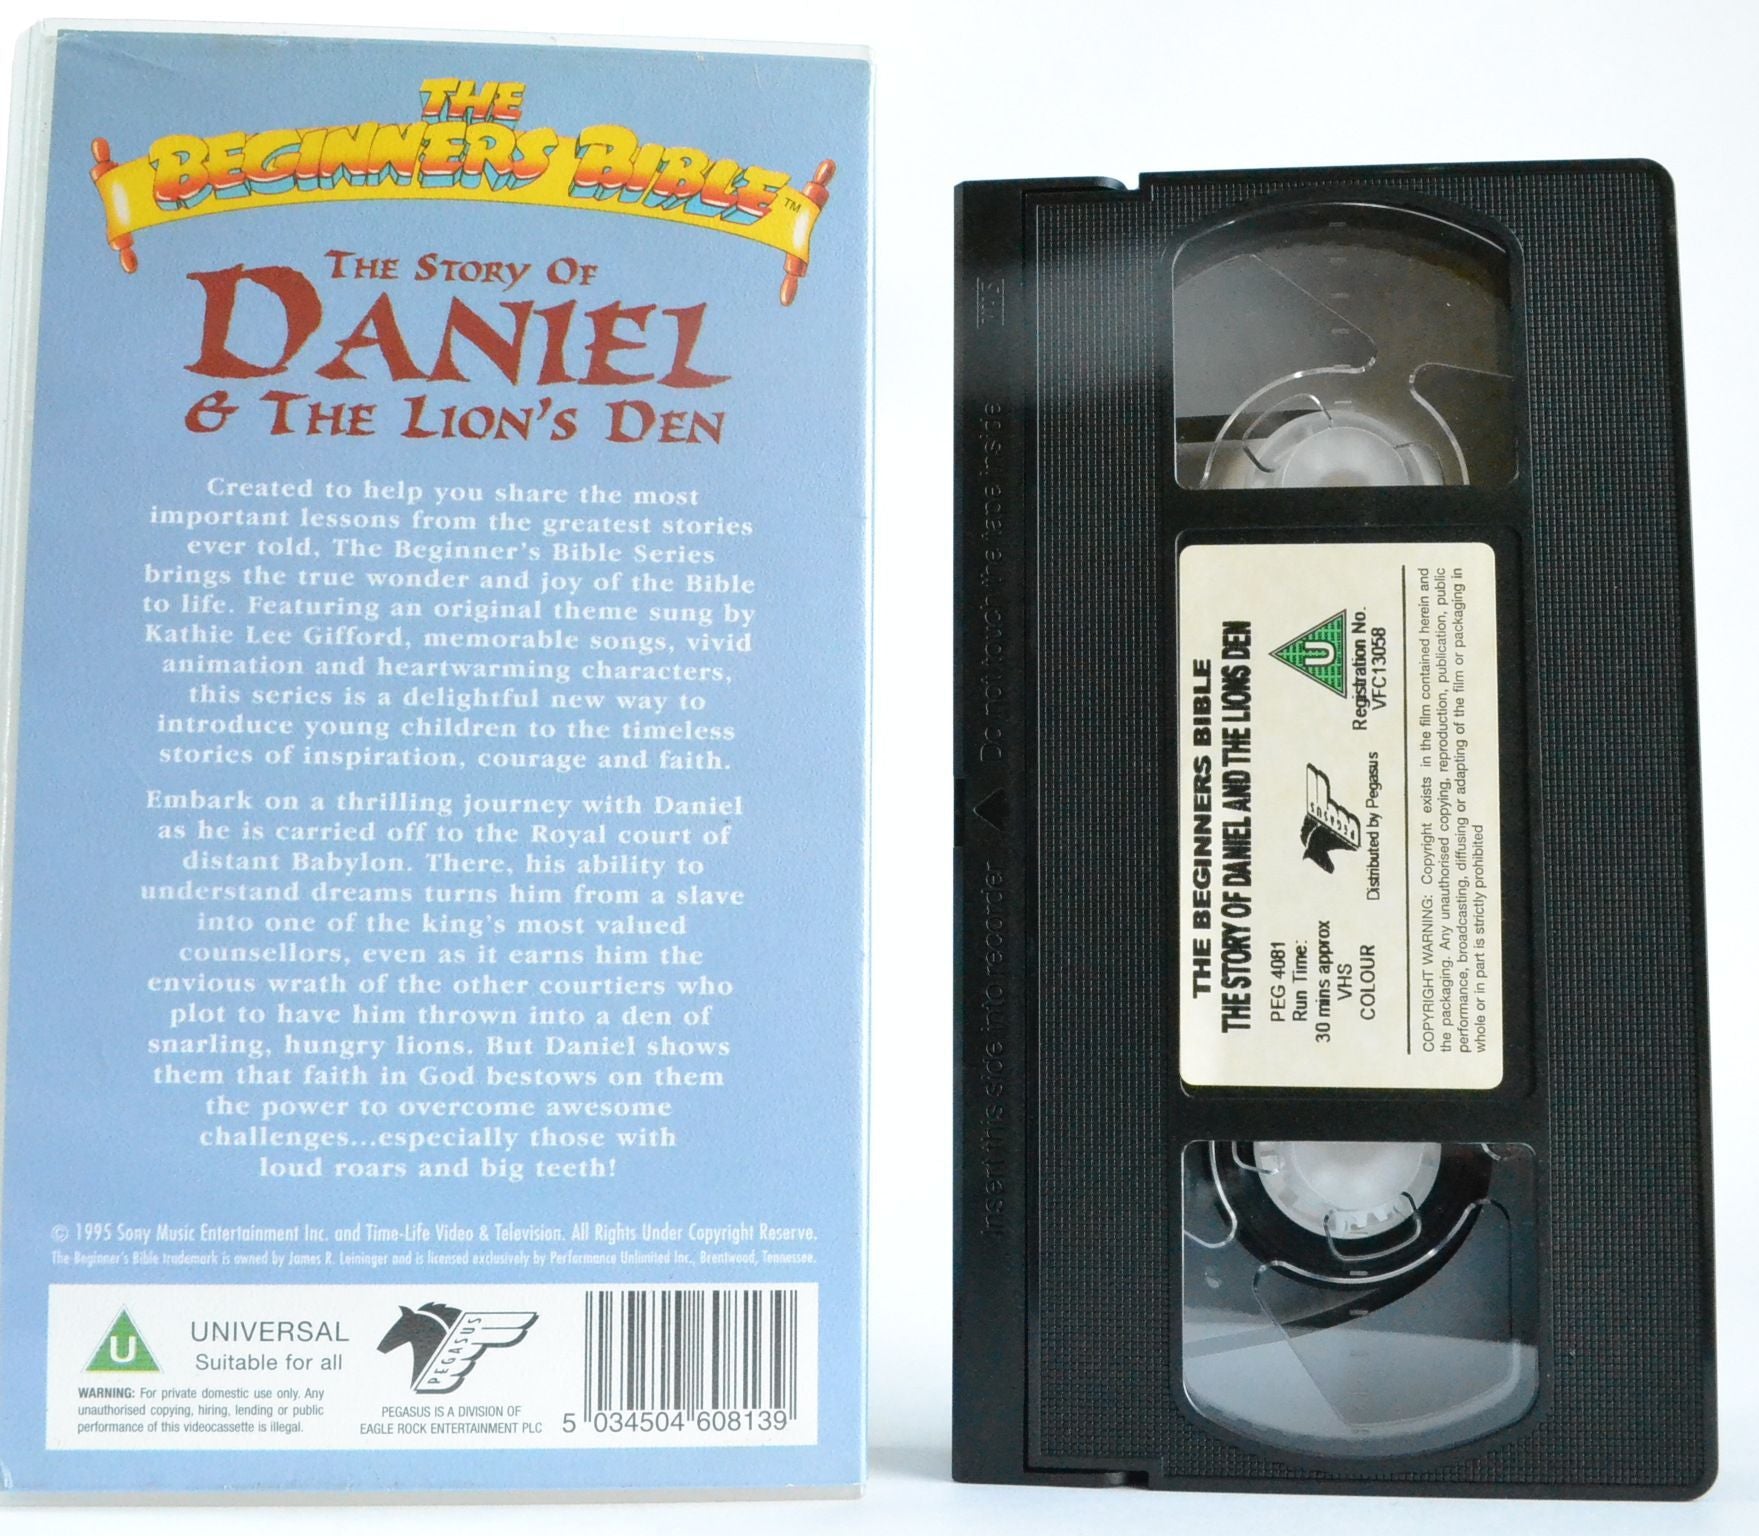 The Story Of Daniel & The Lion’s Den: Kathie Lee Gifford - Bible - Kids - VHS-